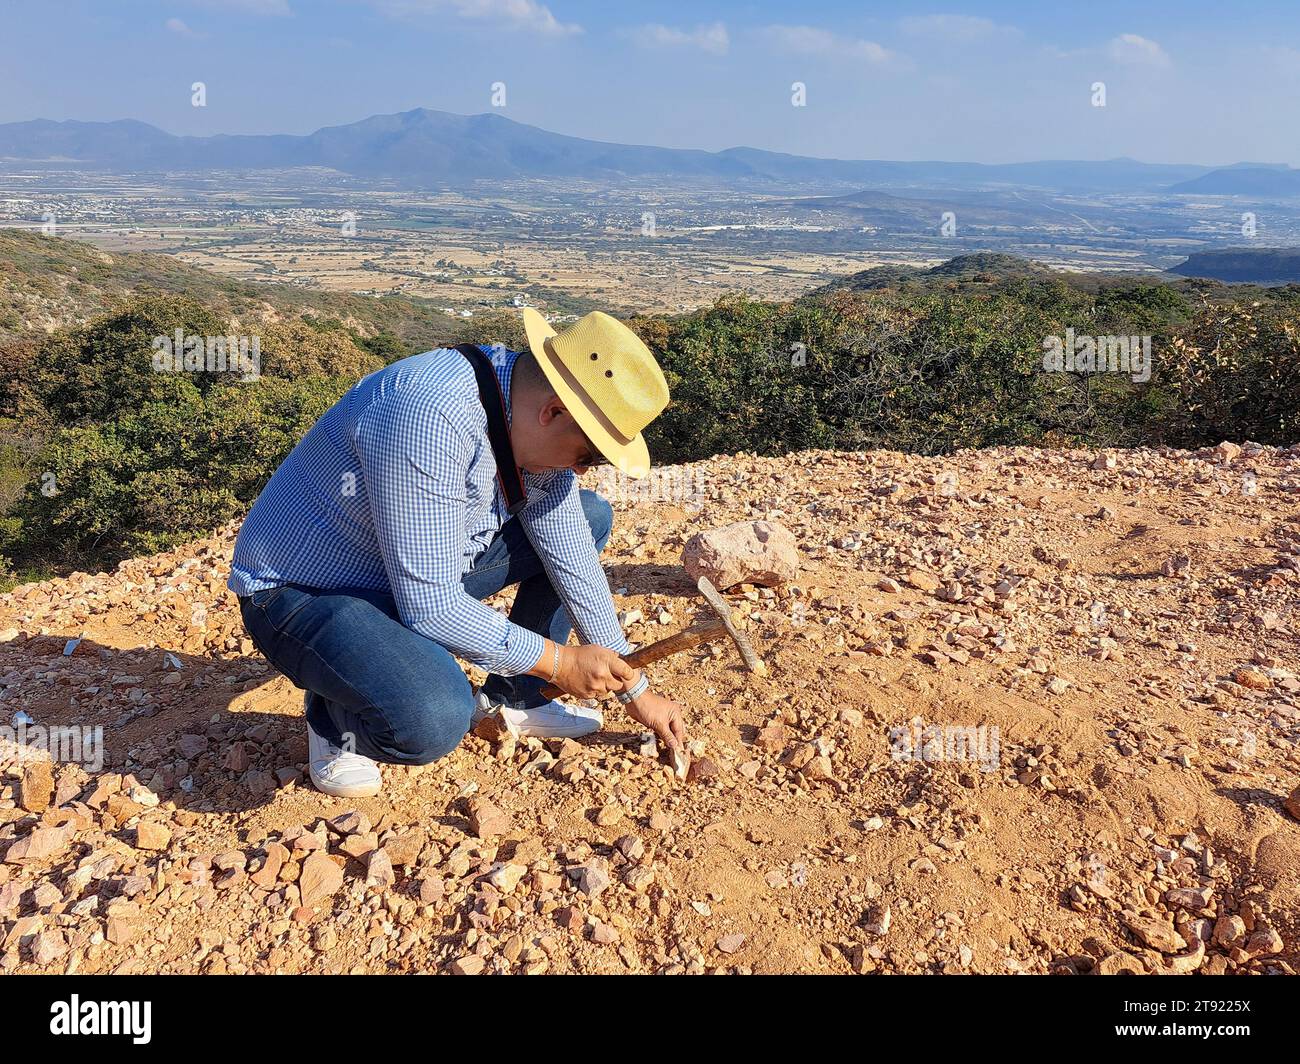 Dark-skinned Latino miner fights for the rights of mine workers who search for minerals to improve their employment situation Stock Photo